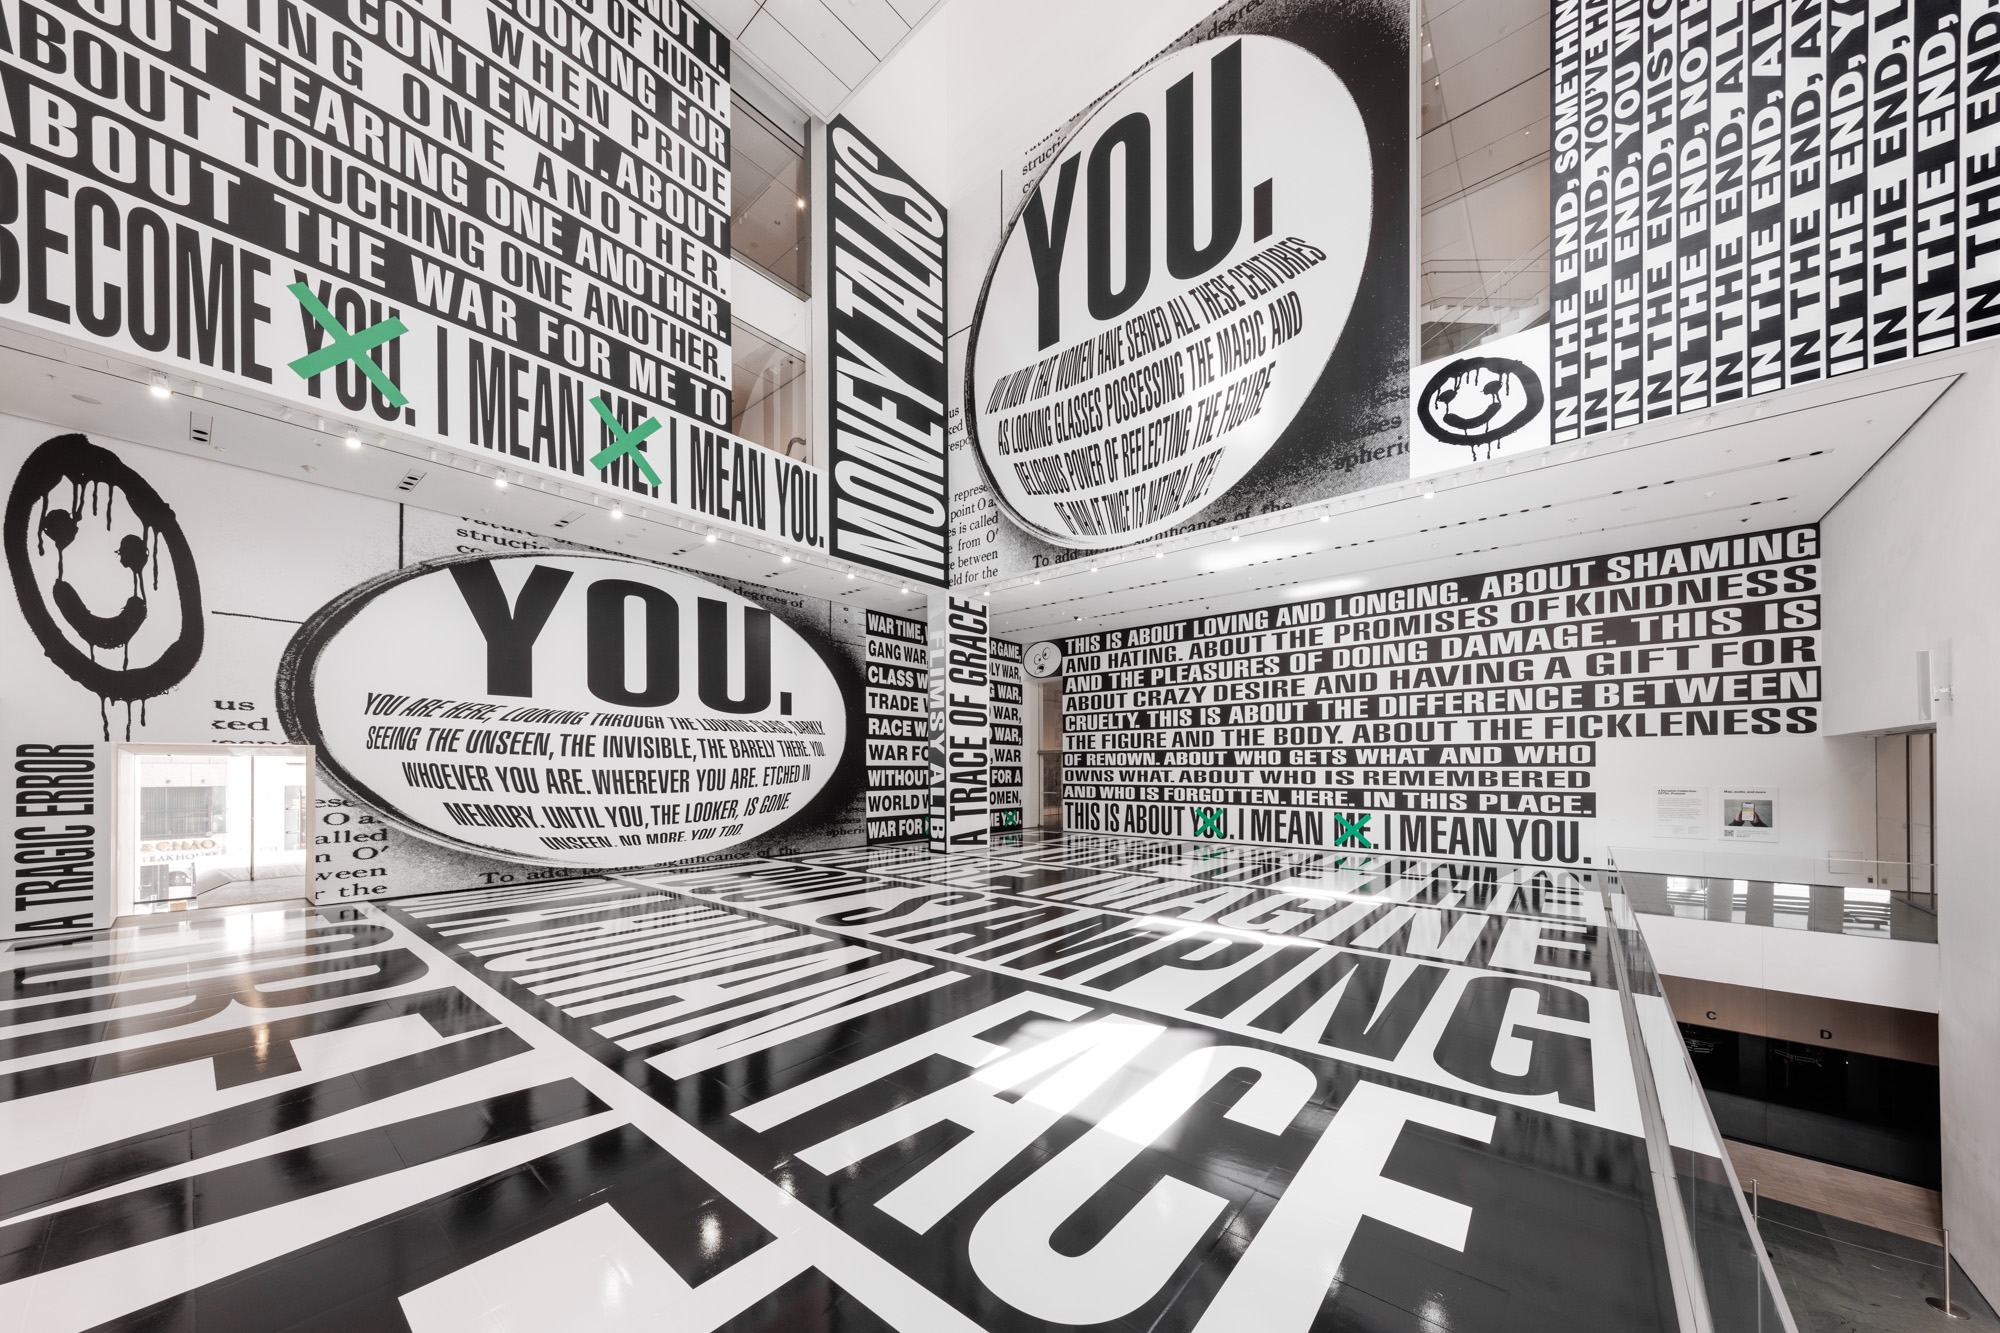 Installation view of ‘Barbara Kruger: Thinking of You. I Mean Me. I Mean You.,’ on view at The Museum of Modern Art, New York from July 16 – January 2, 2023. Photo: Emile Askey